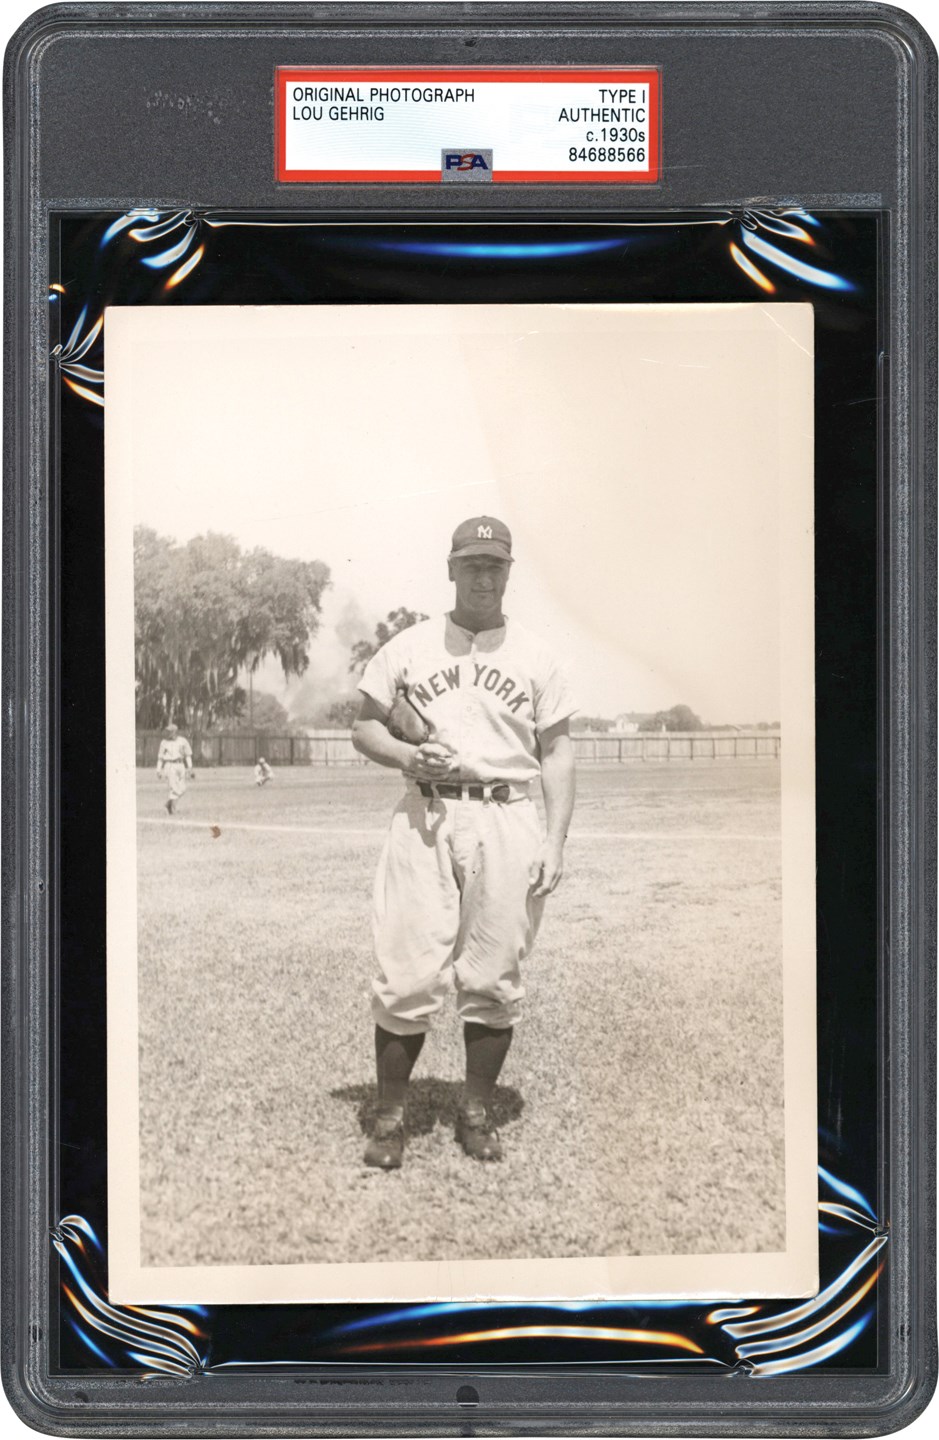 Vintage Sports Photographs - 1939 Lou Gehrig New York Yankees Original Photograph - One Month Before ALS Diagnosis (PSA Type I)